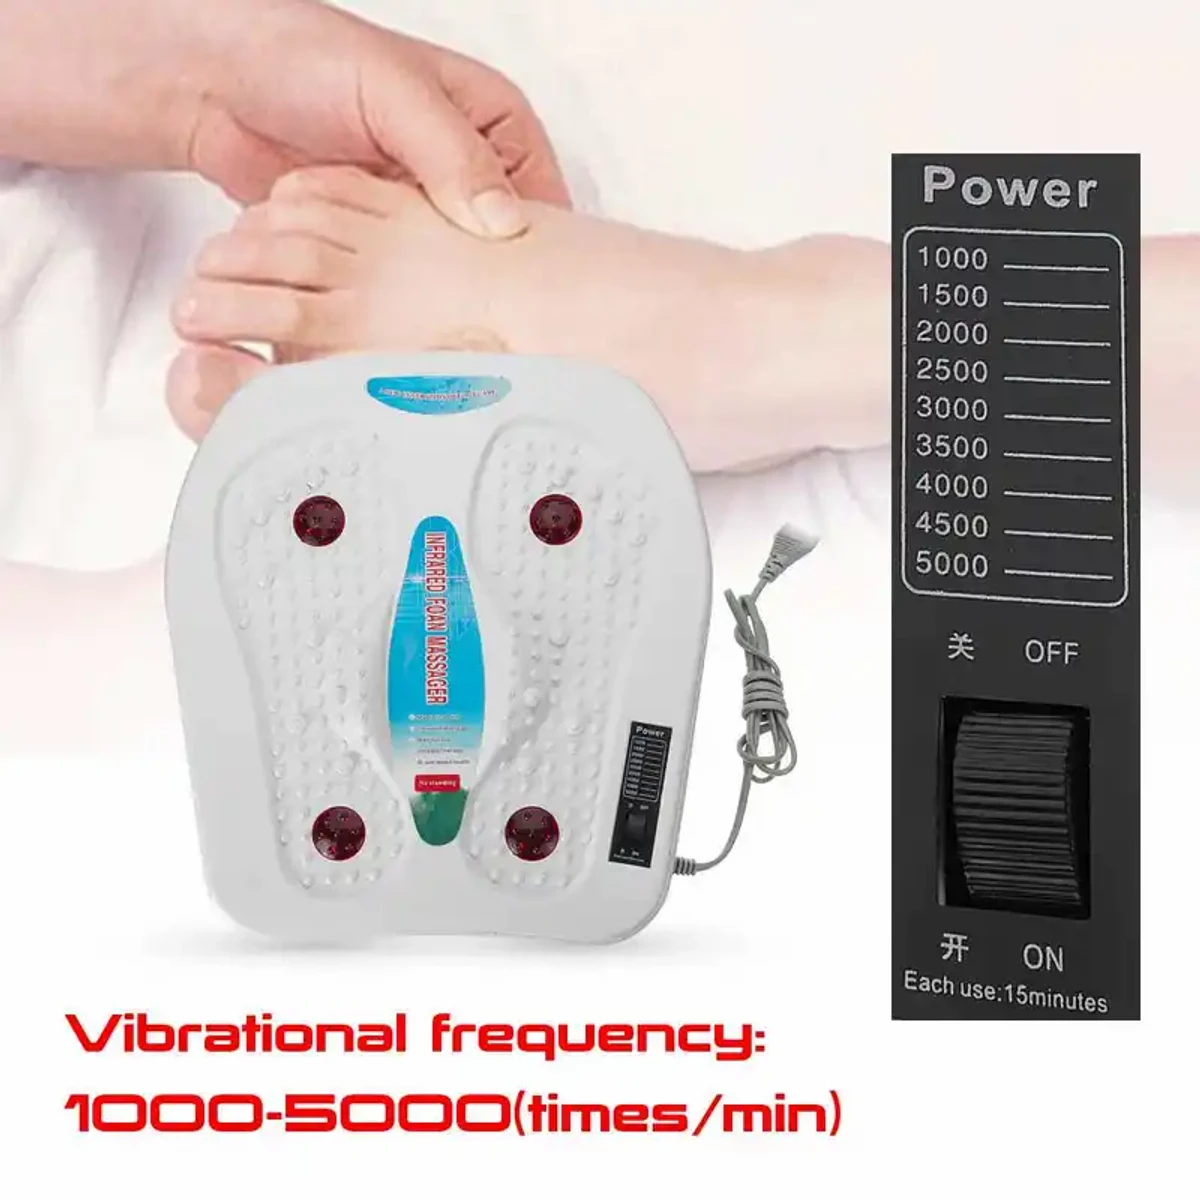 ELECTRIC FOOT THERAPY HEALTH CARE & RELAXATION